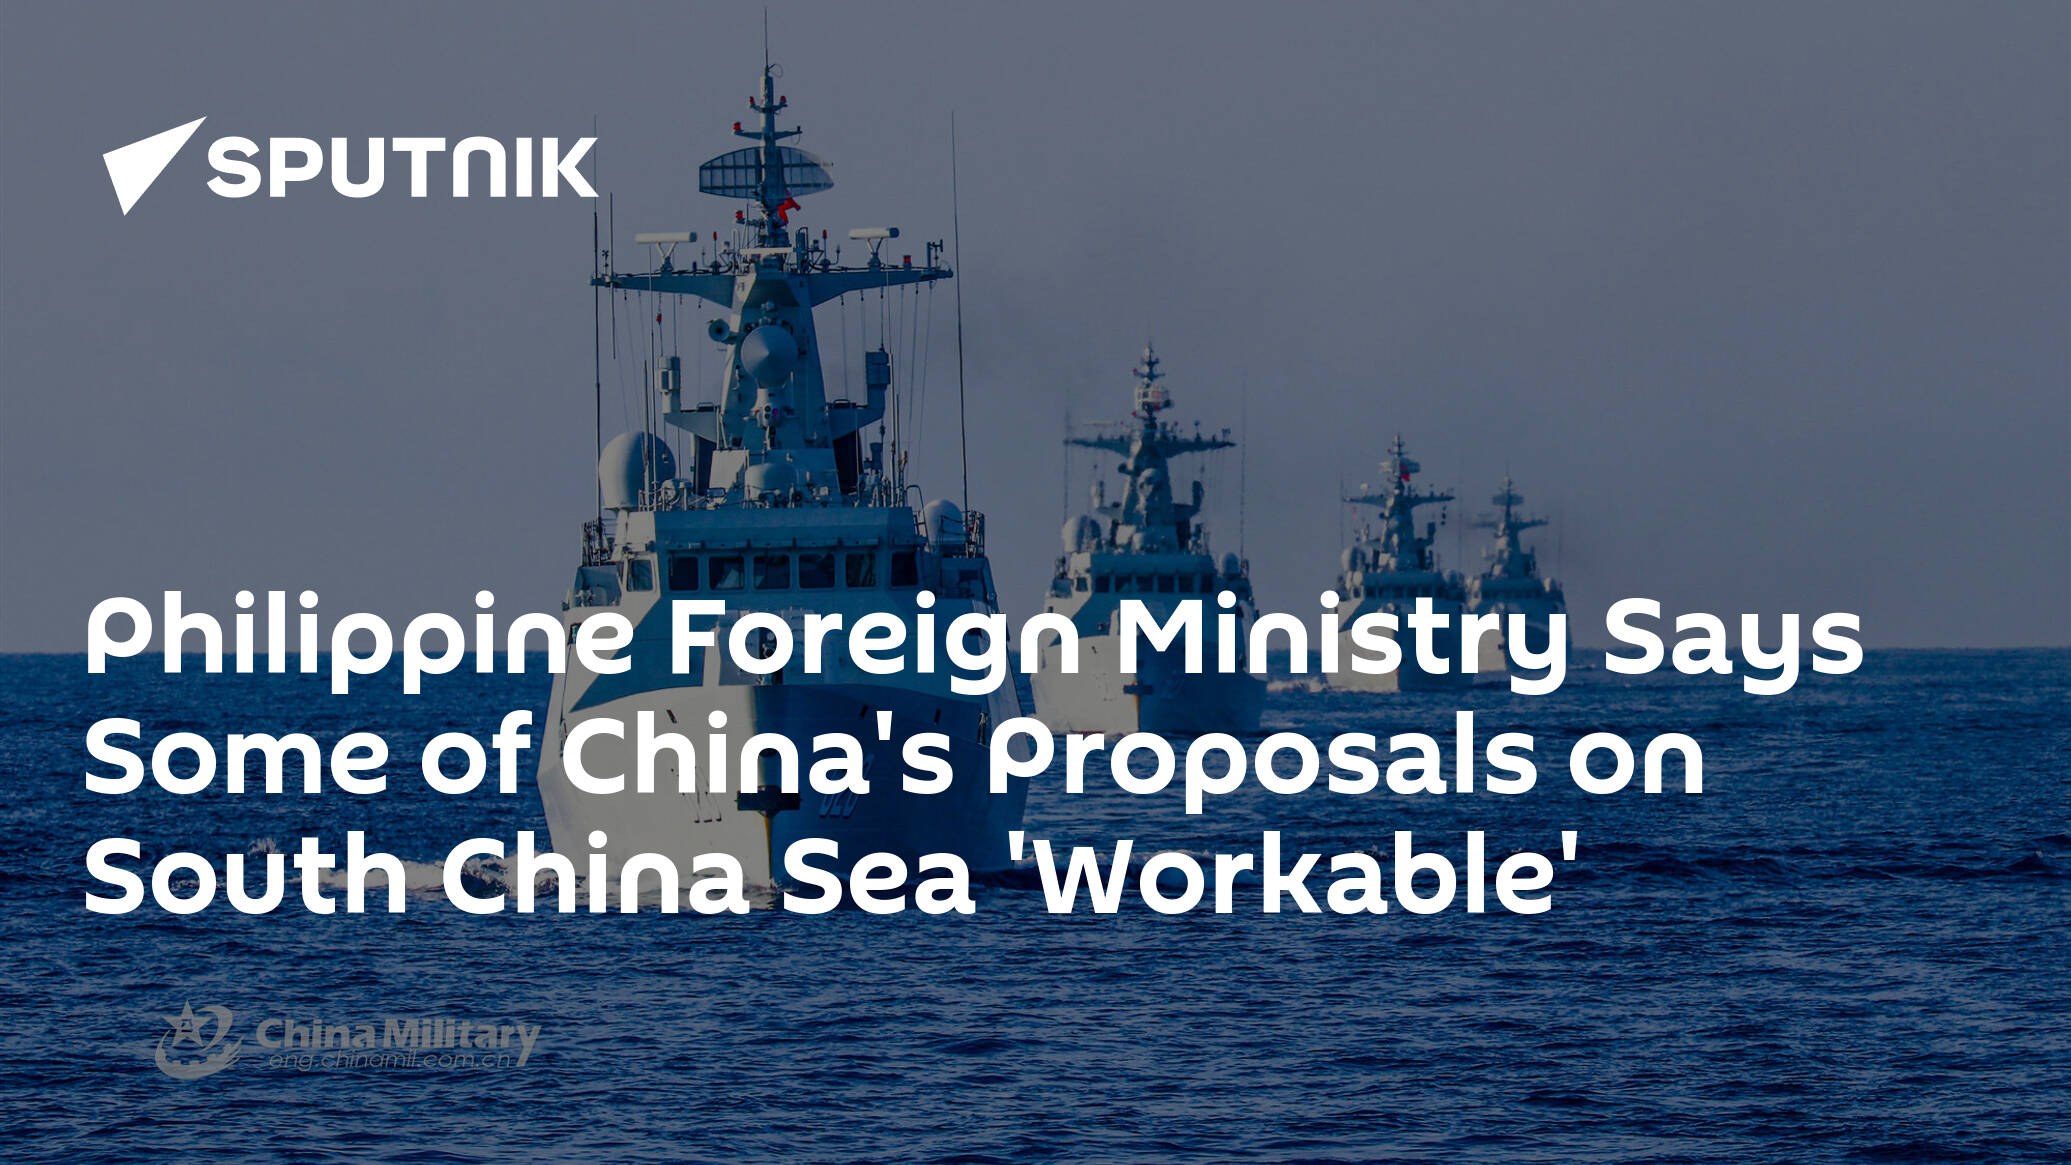 Philippine Foreign Ministry Says Some of China's Proposals on South China Sea 'Workable'